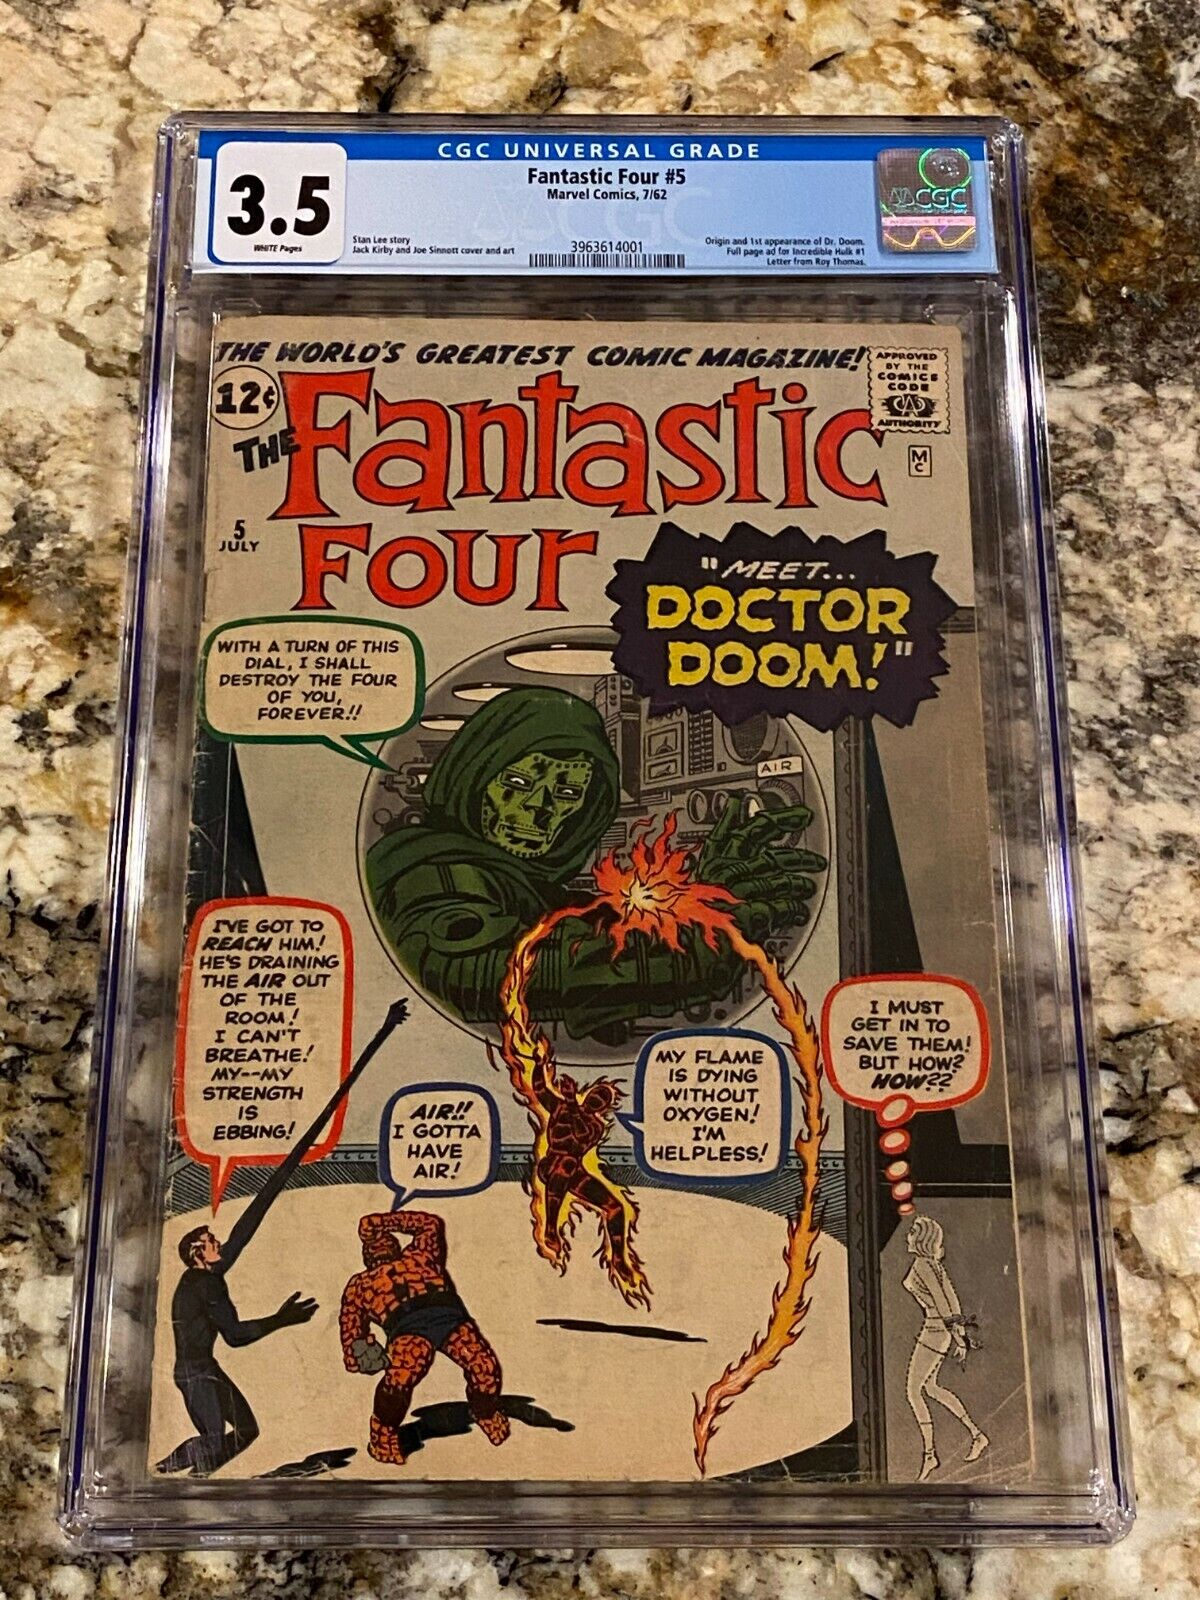 FANTASTIC FOUR #5 CGC 3.5 RARE WHITE PAGES NEVER PRESSED 1ST DR DOOM HOT GRAIL